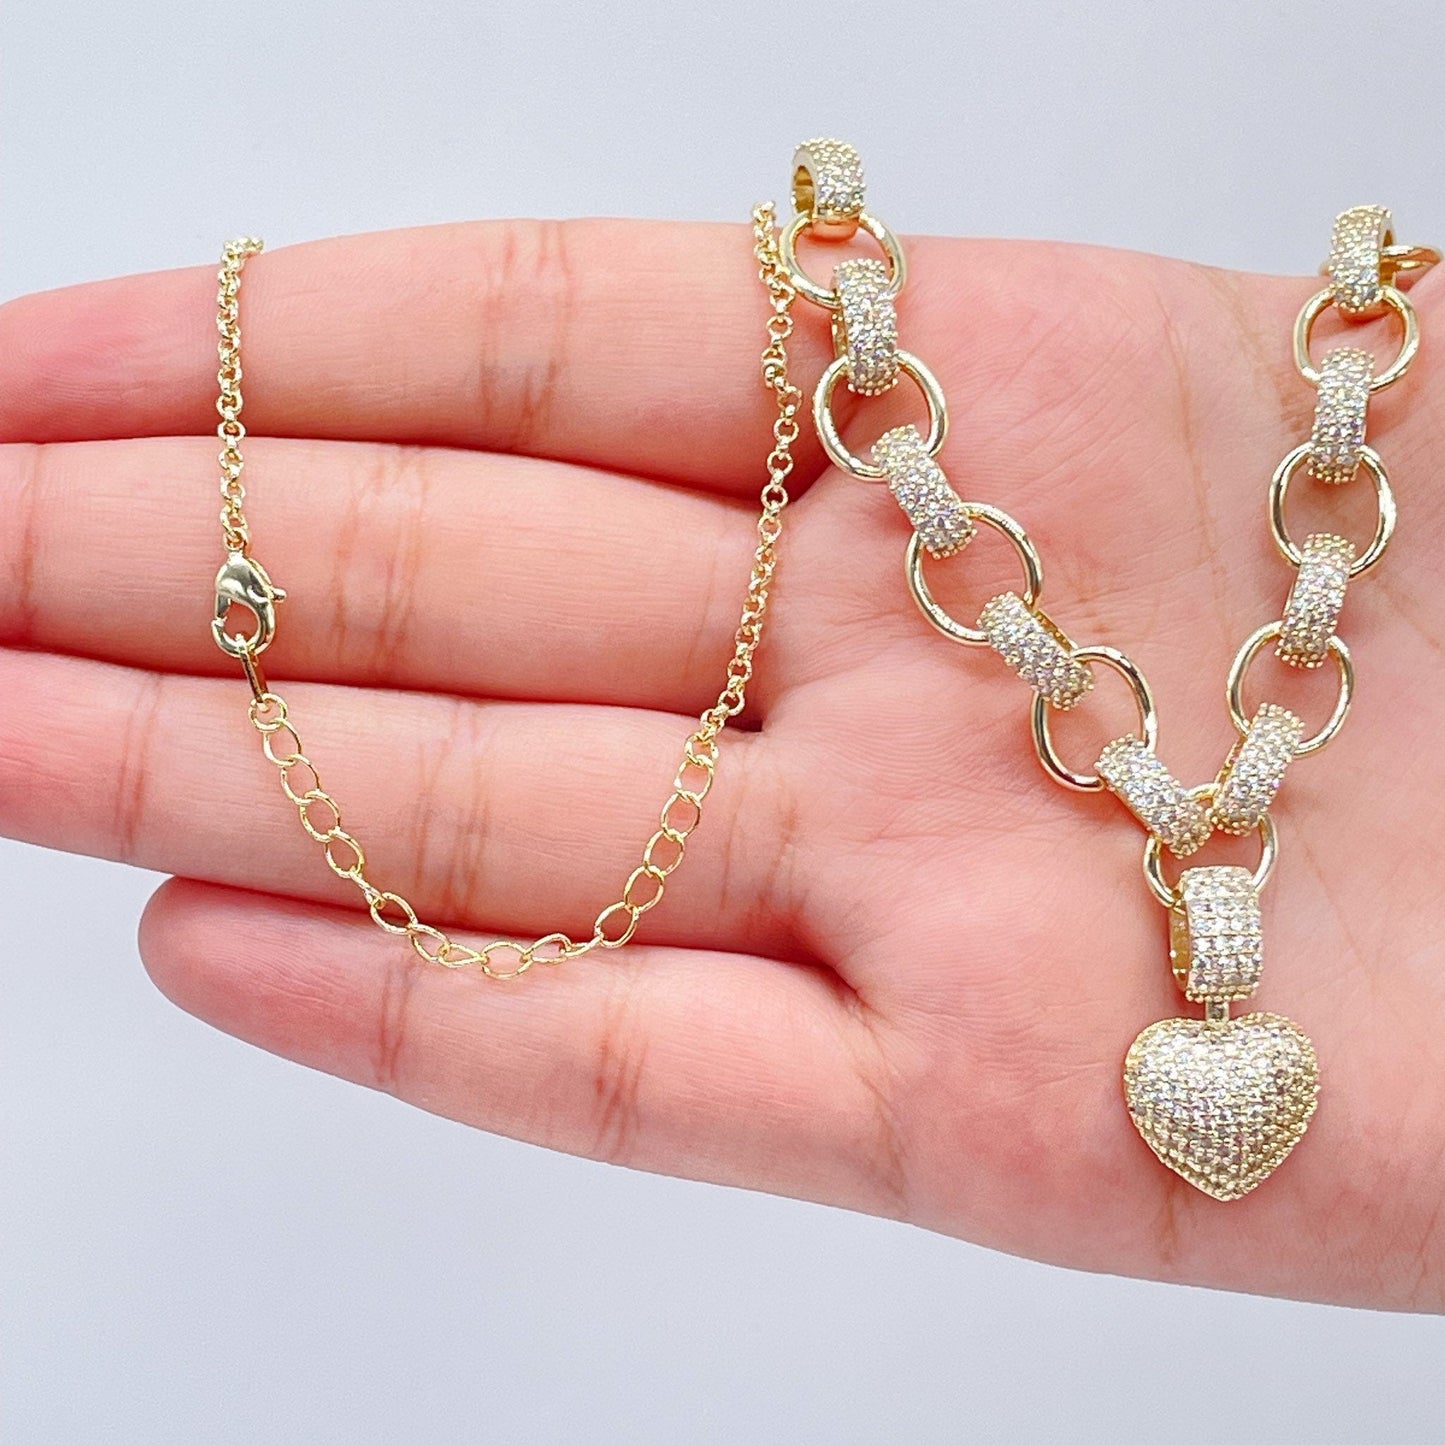 18k Gold Layered Puffy Heart Set of Bracelet Necklace In Micro Pave Cubic